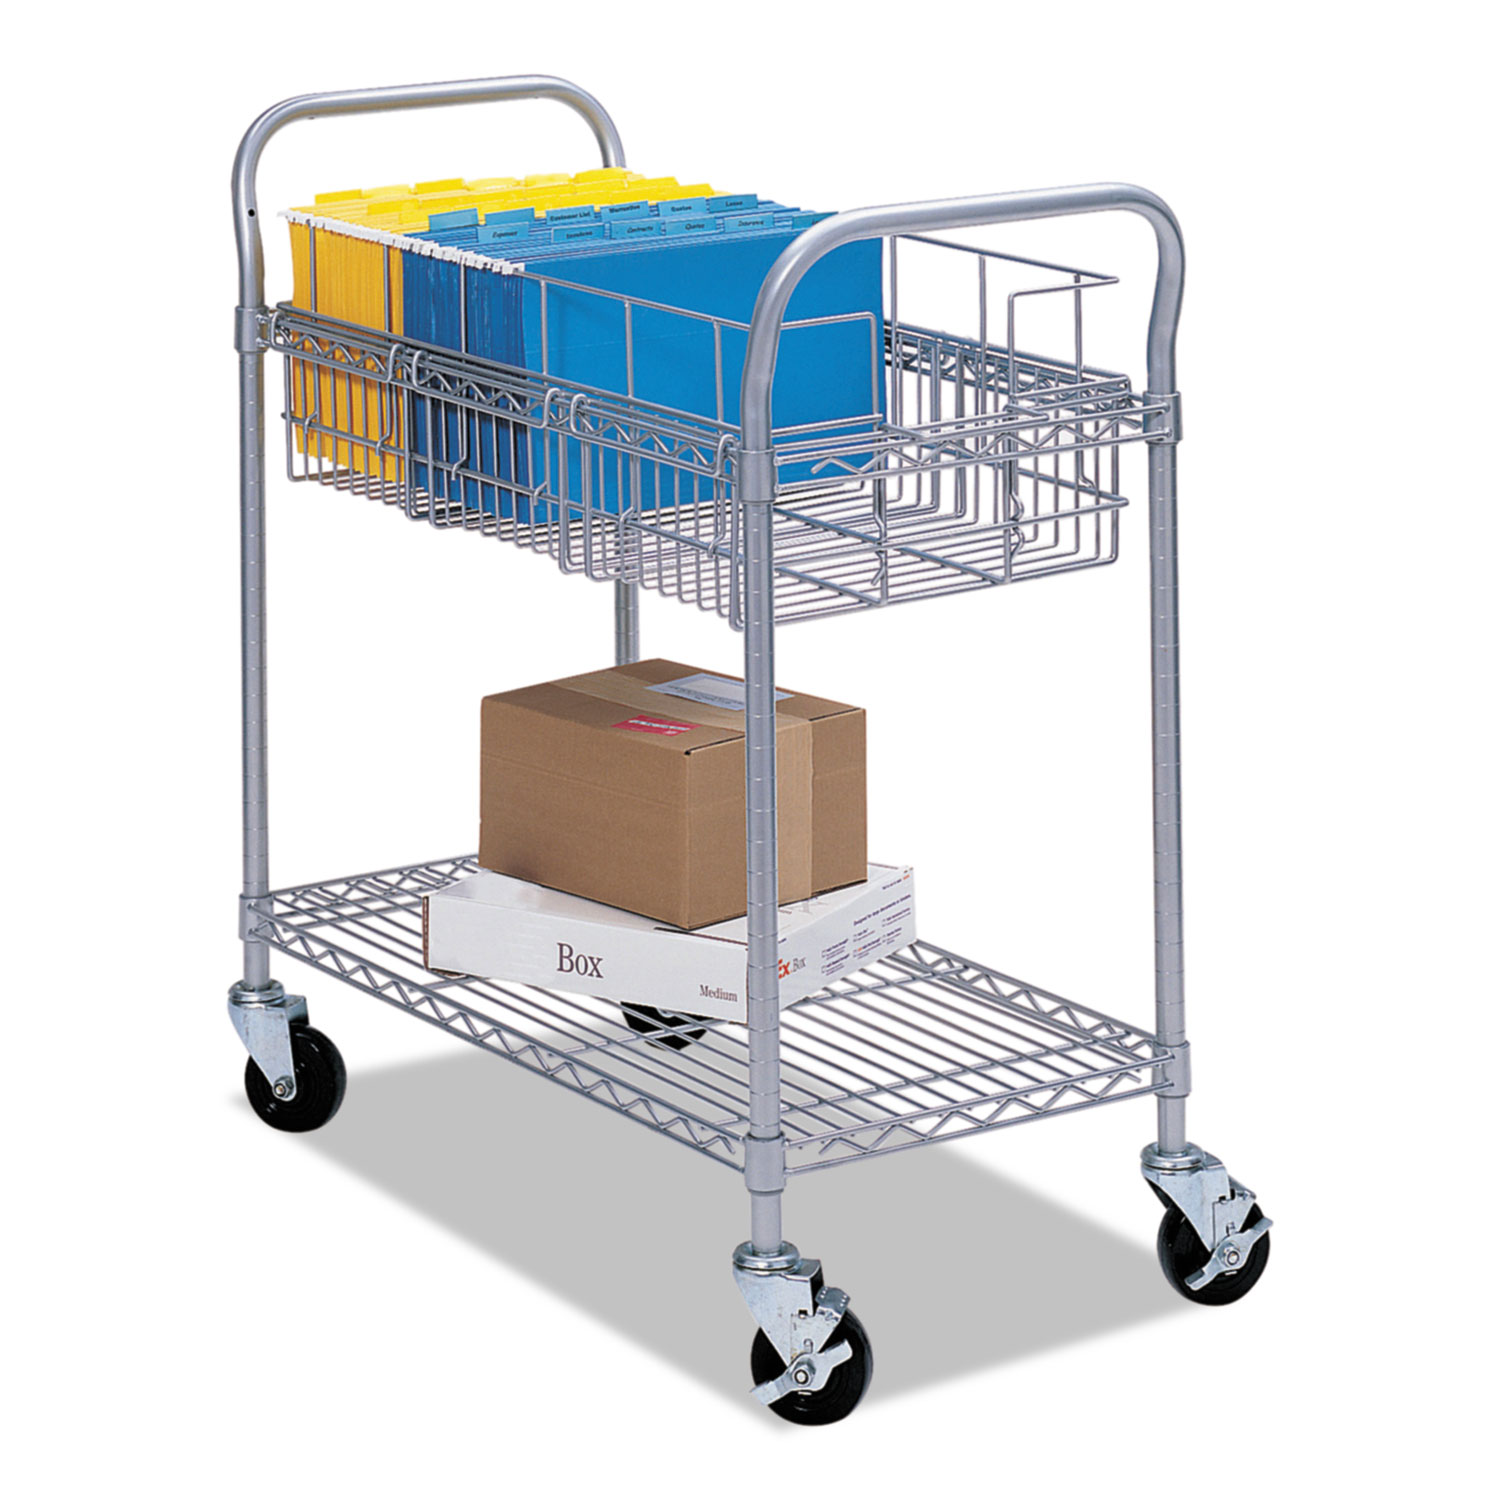  Safco 5235GR Wire Mail Cart, 600-lb Capacity, 18.75w x 26.75d x 38.5h, Metallic Gray (SAF5235GR) 